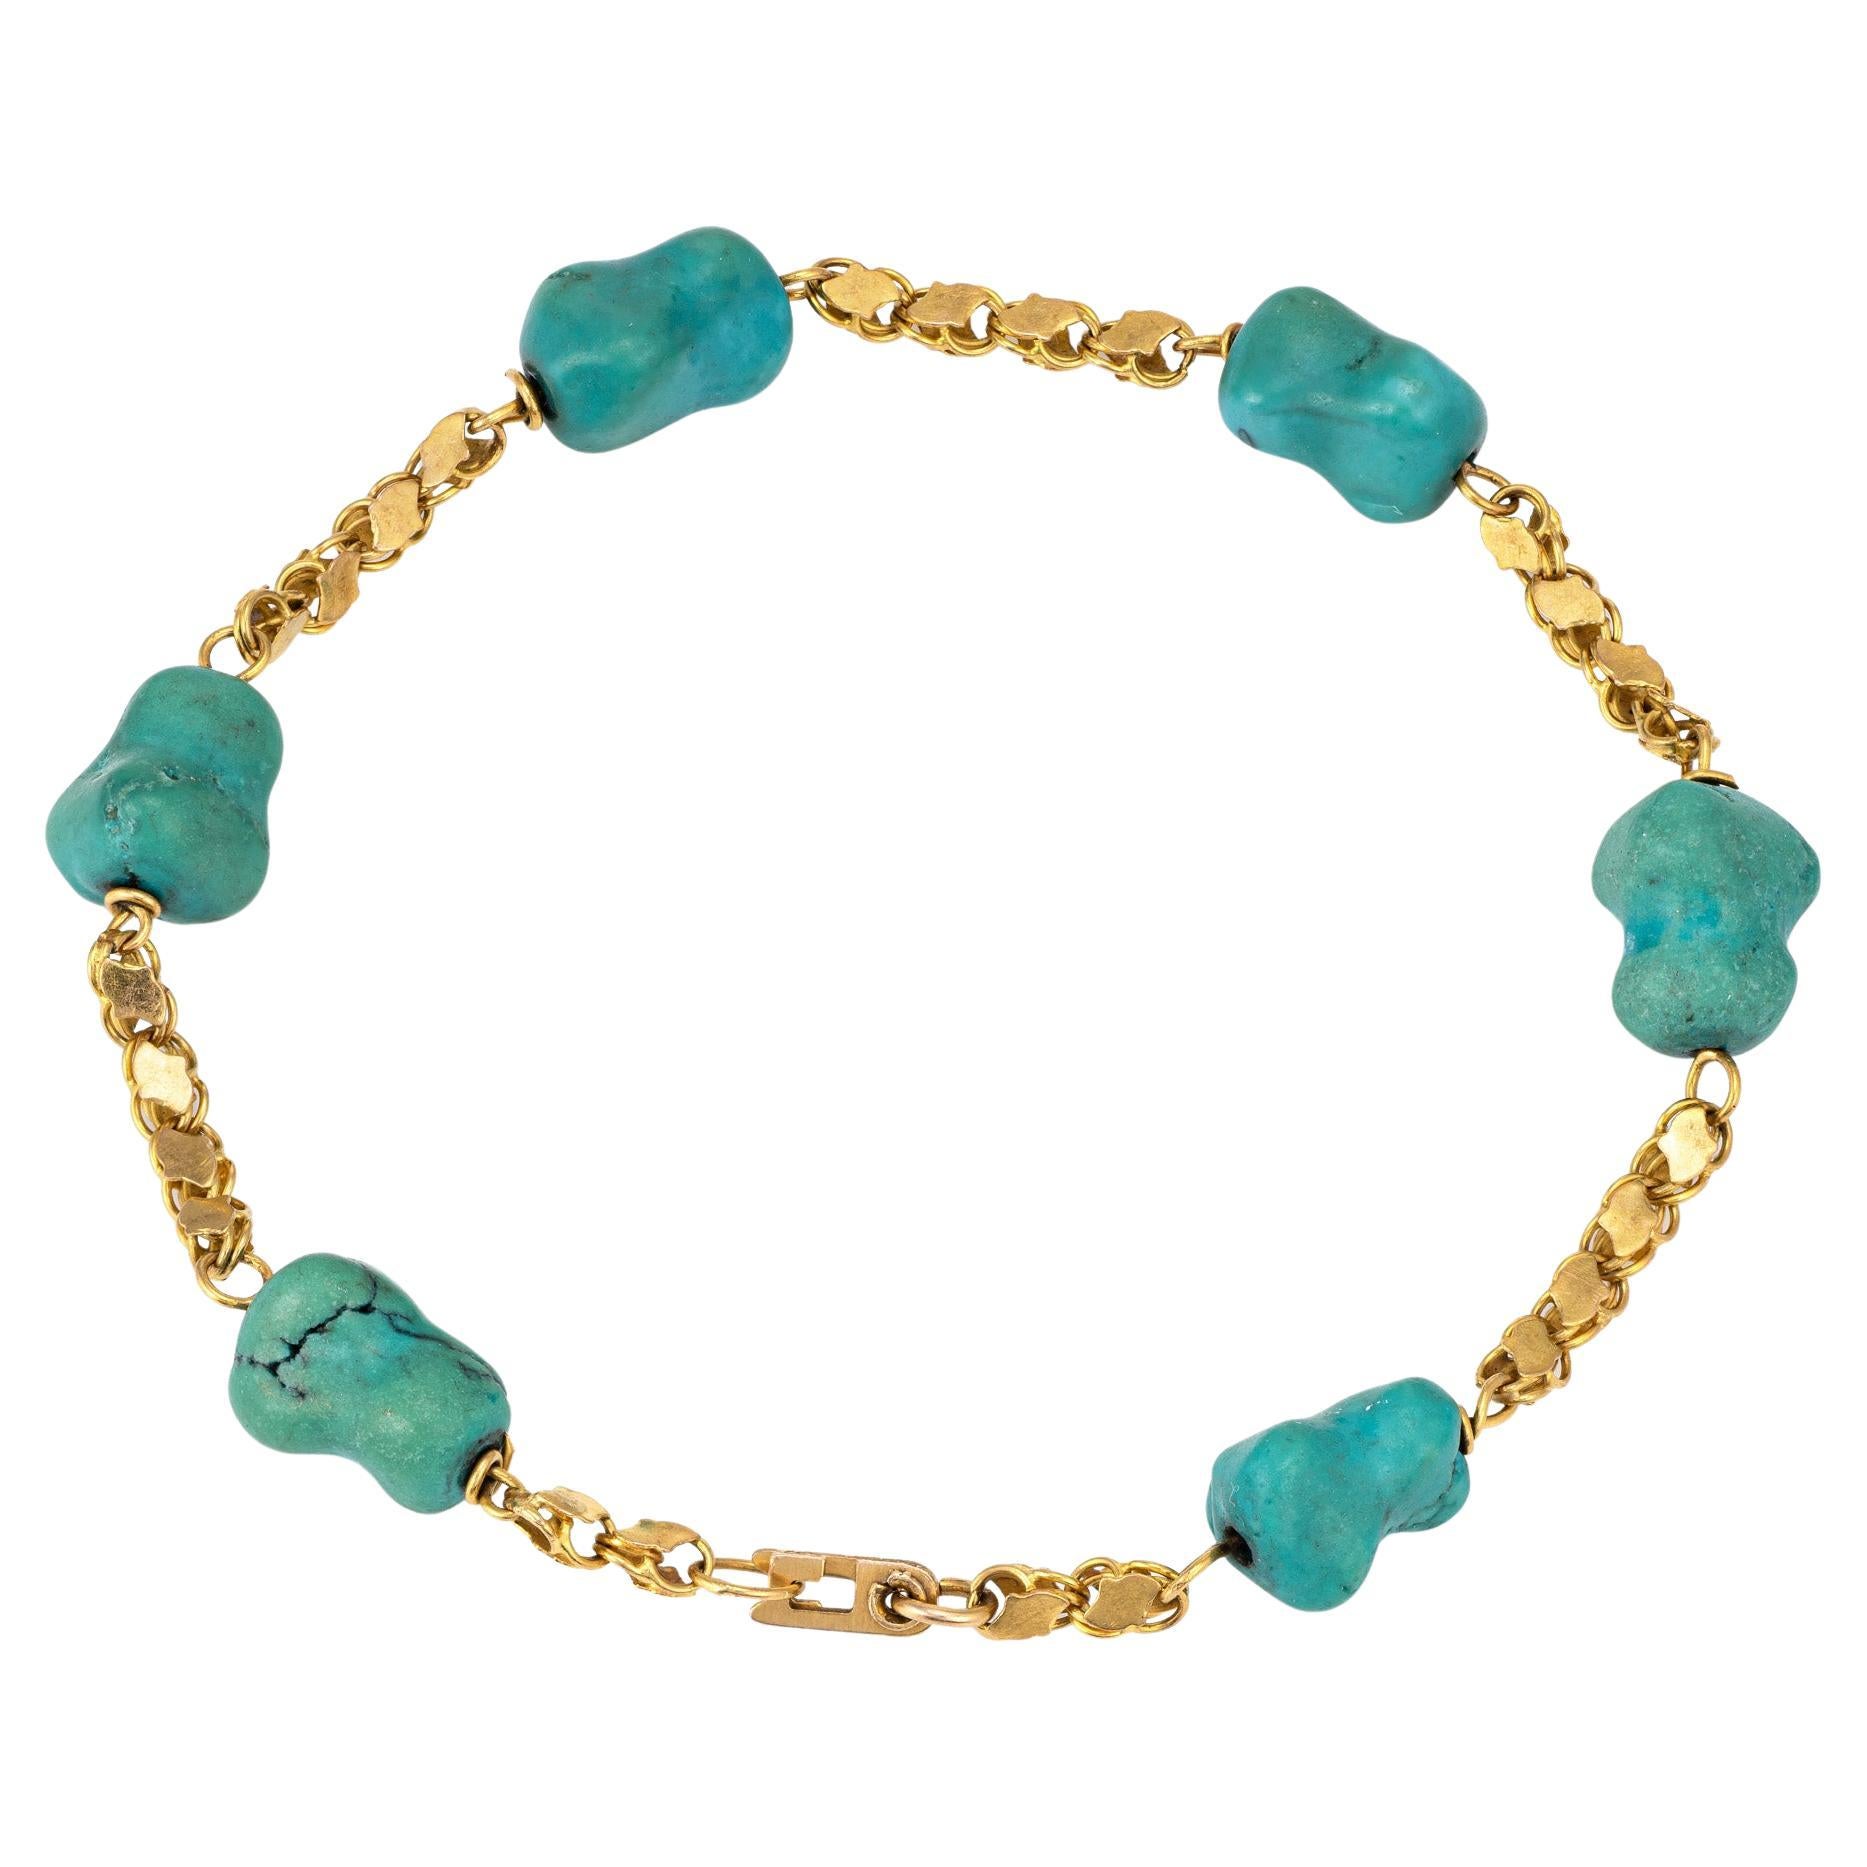 Freeform Turquoise Bracelet 1960s Vintage 18k Yellow Gold Fancy Link Jewelry For Sale